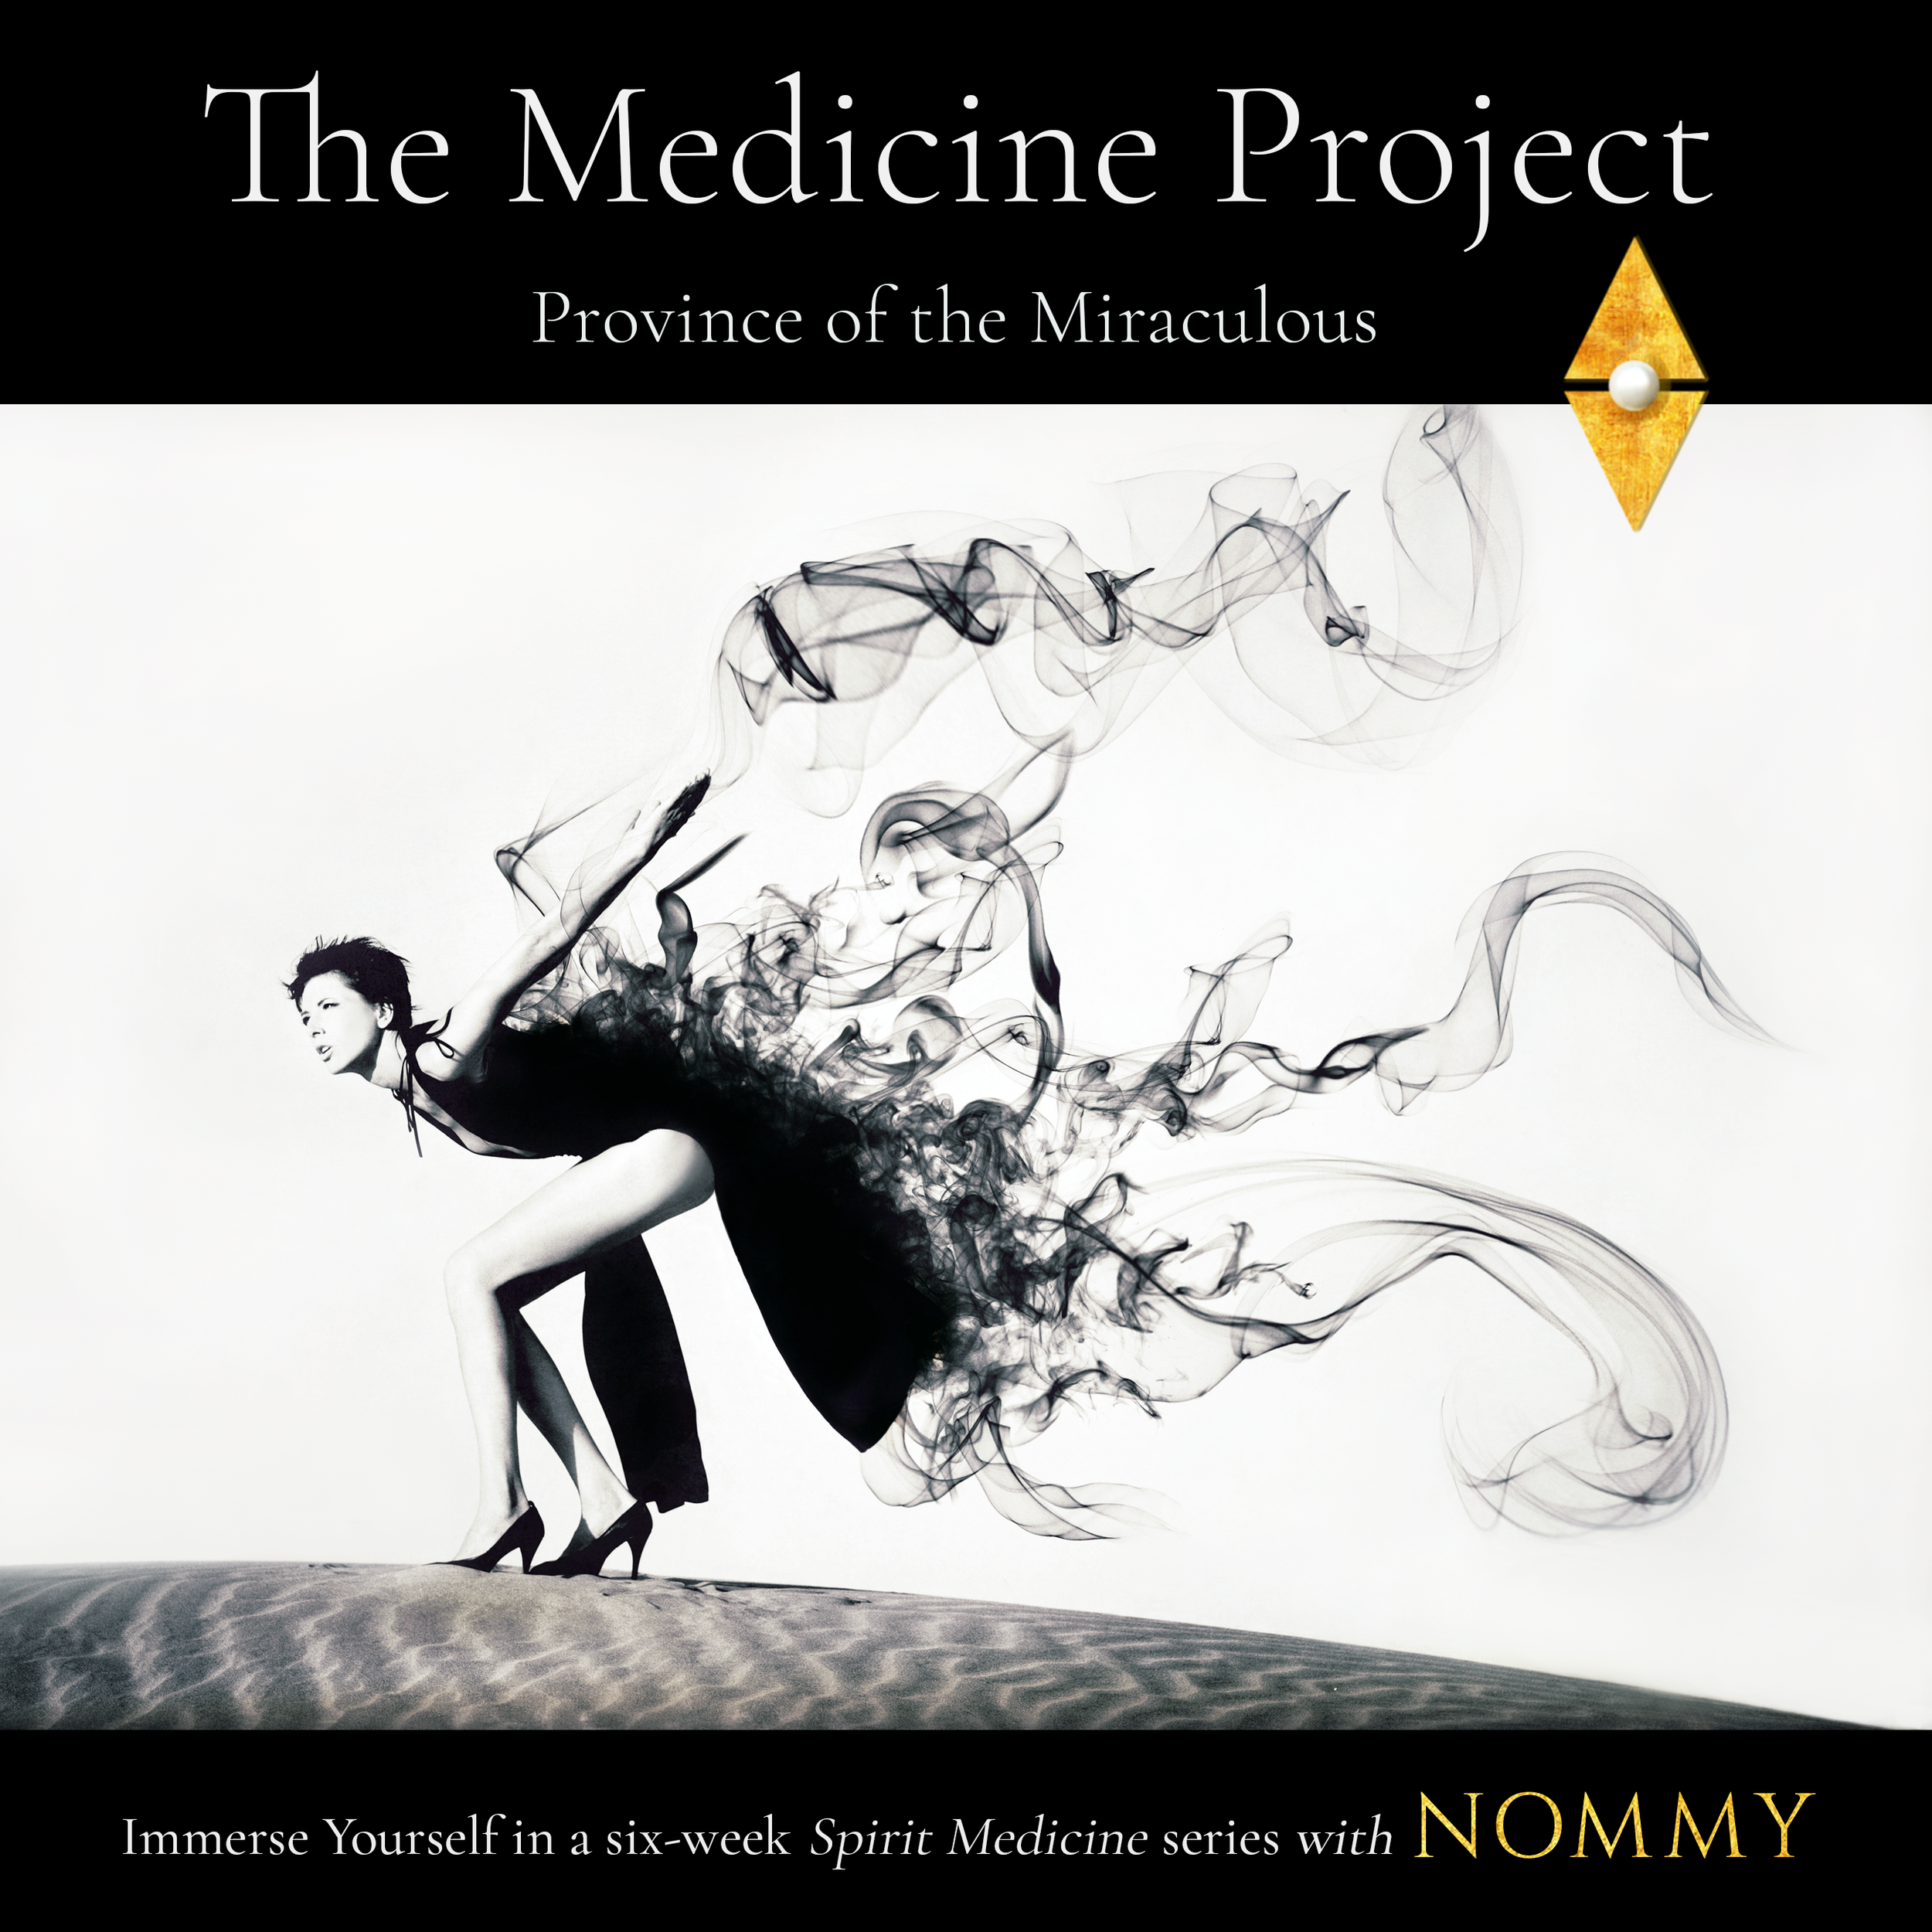 nommy medicine project product graphic without detailed text.png